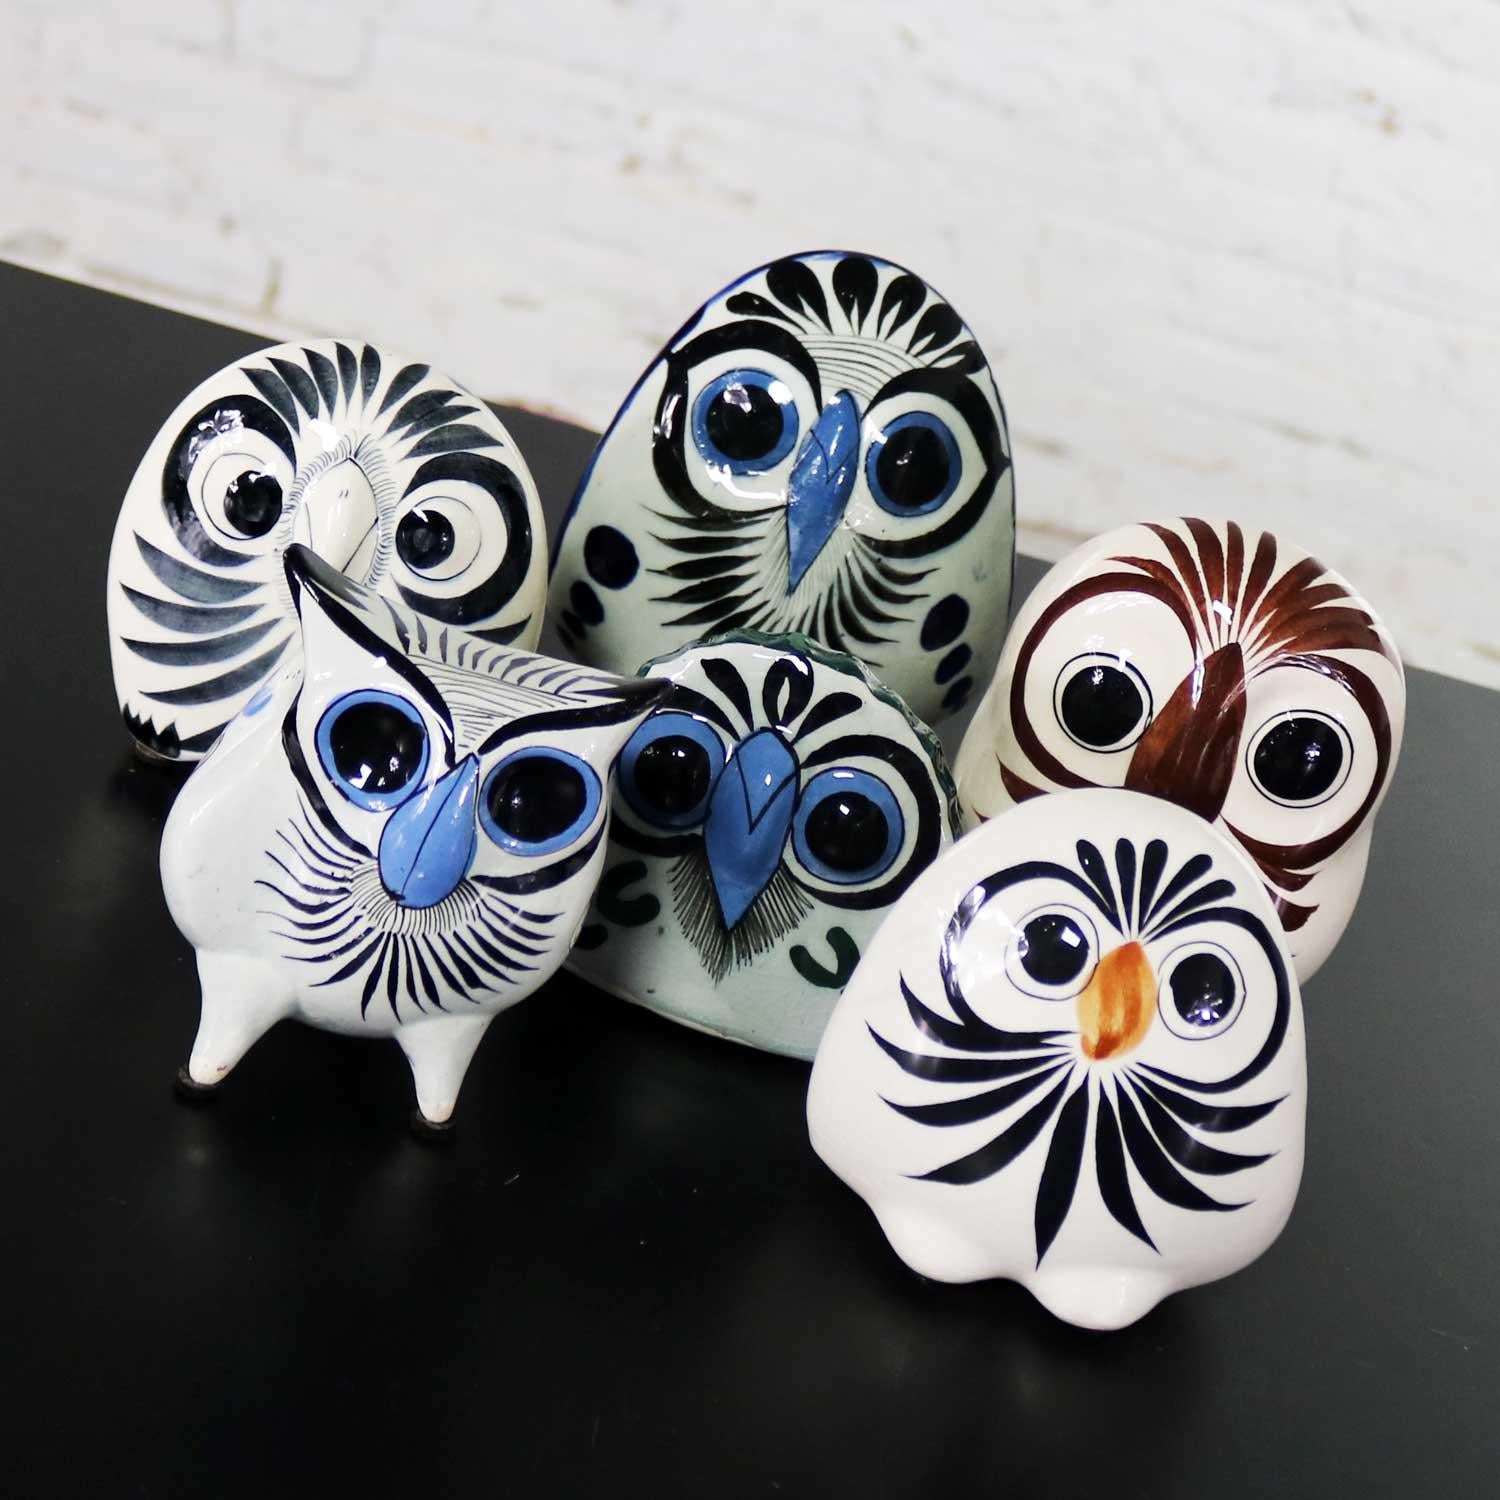 Instant collection of six hand painted midcentury vintage Tonala pottery owls. Two are marked Mexico four are unmarked. They are all in wonderful vintage condition with normal wear for age, circa mid-20th century. 

We are loving these quirky